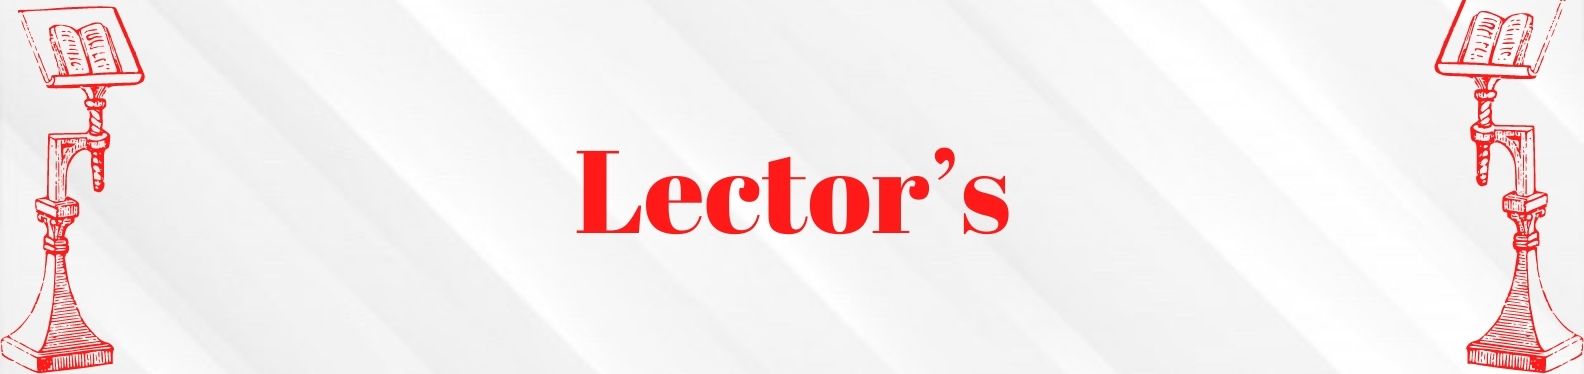 The word Lector's written in red on a white background